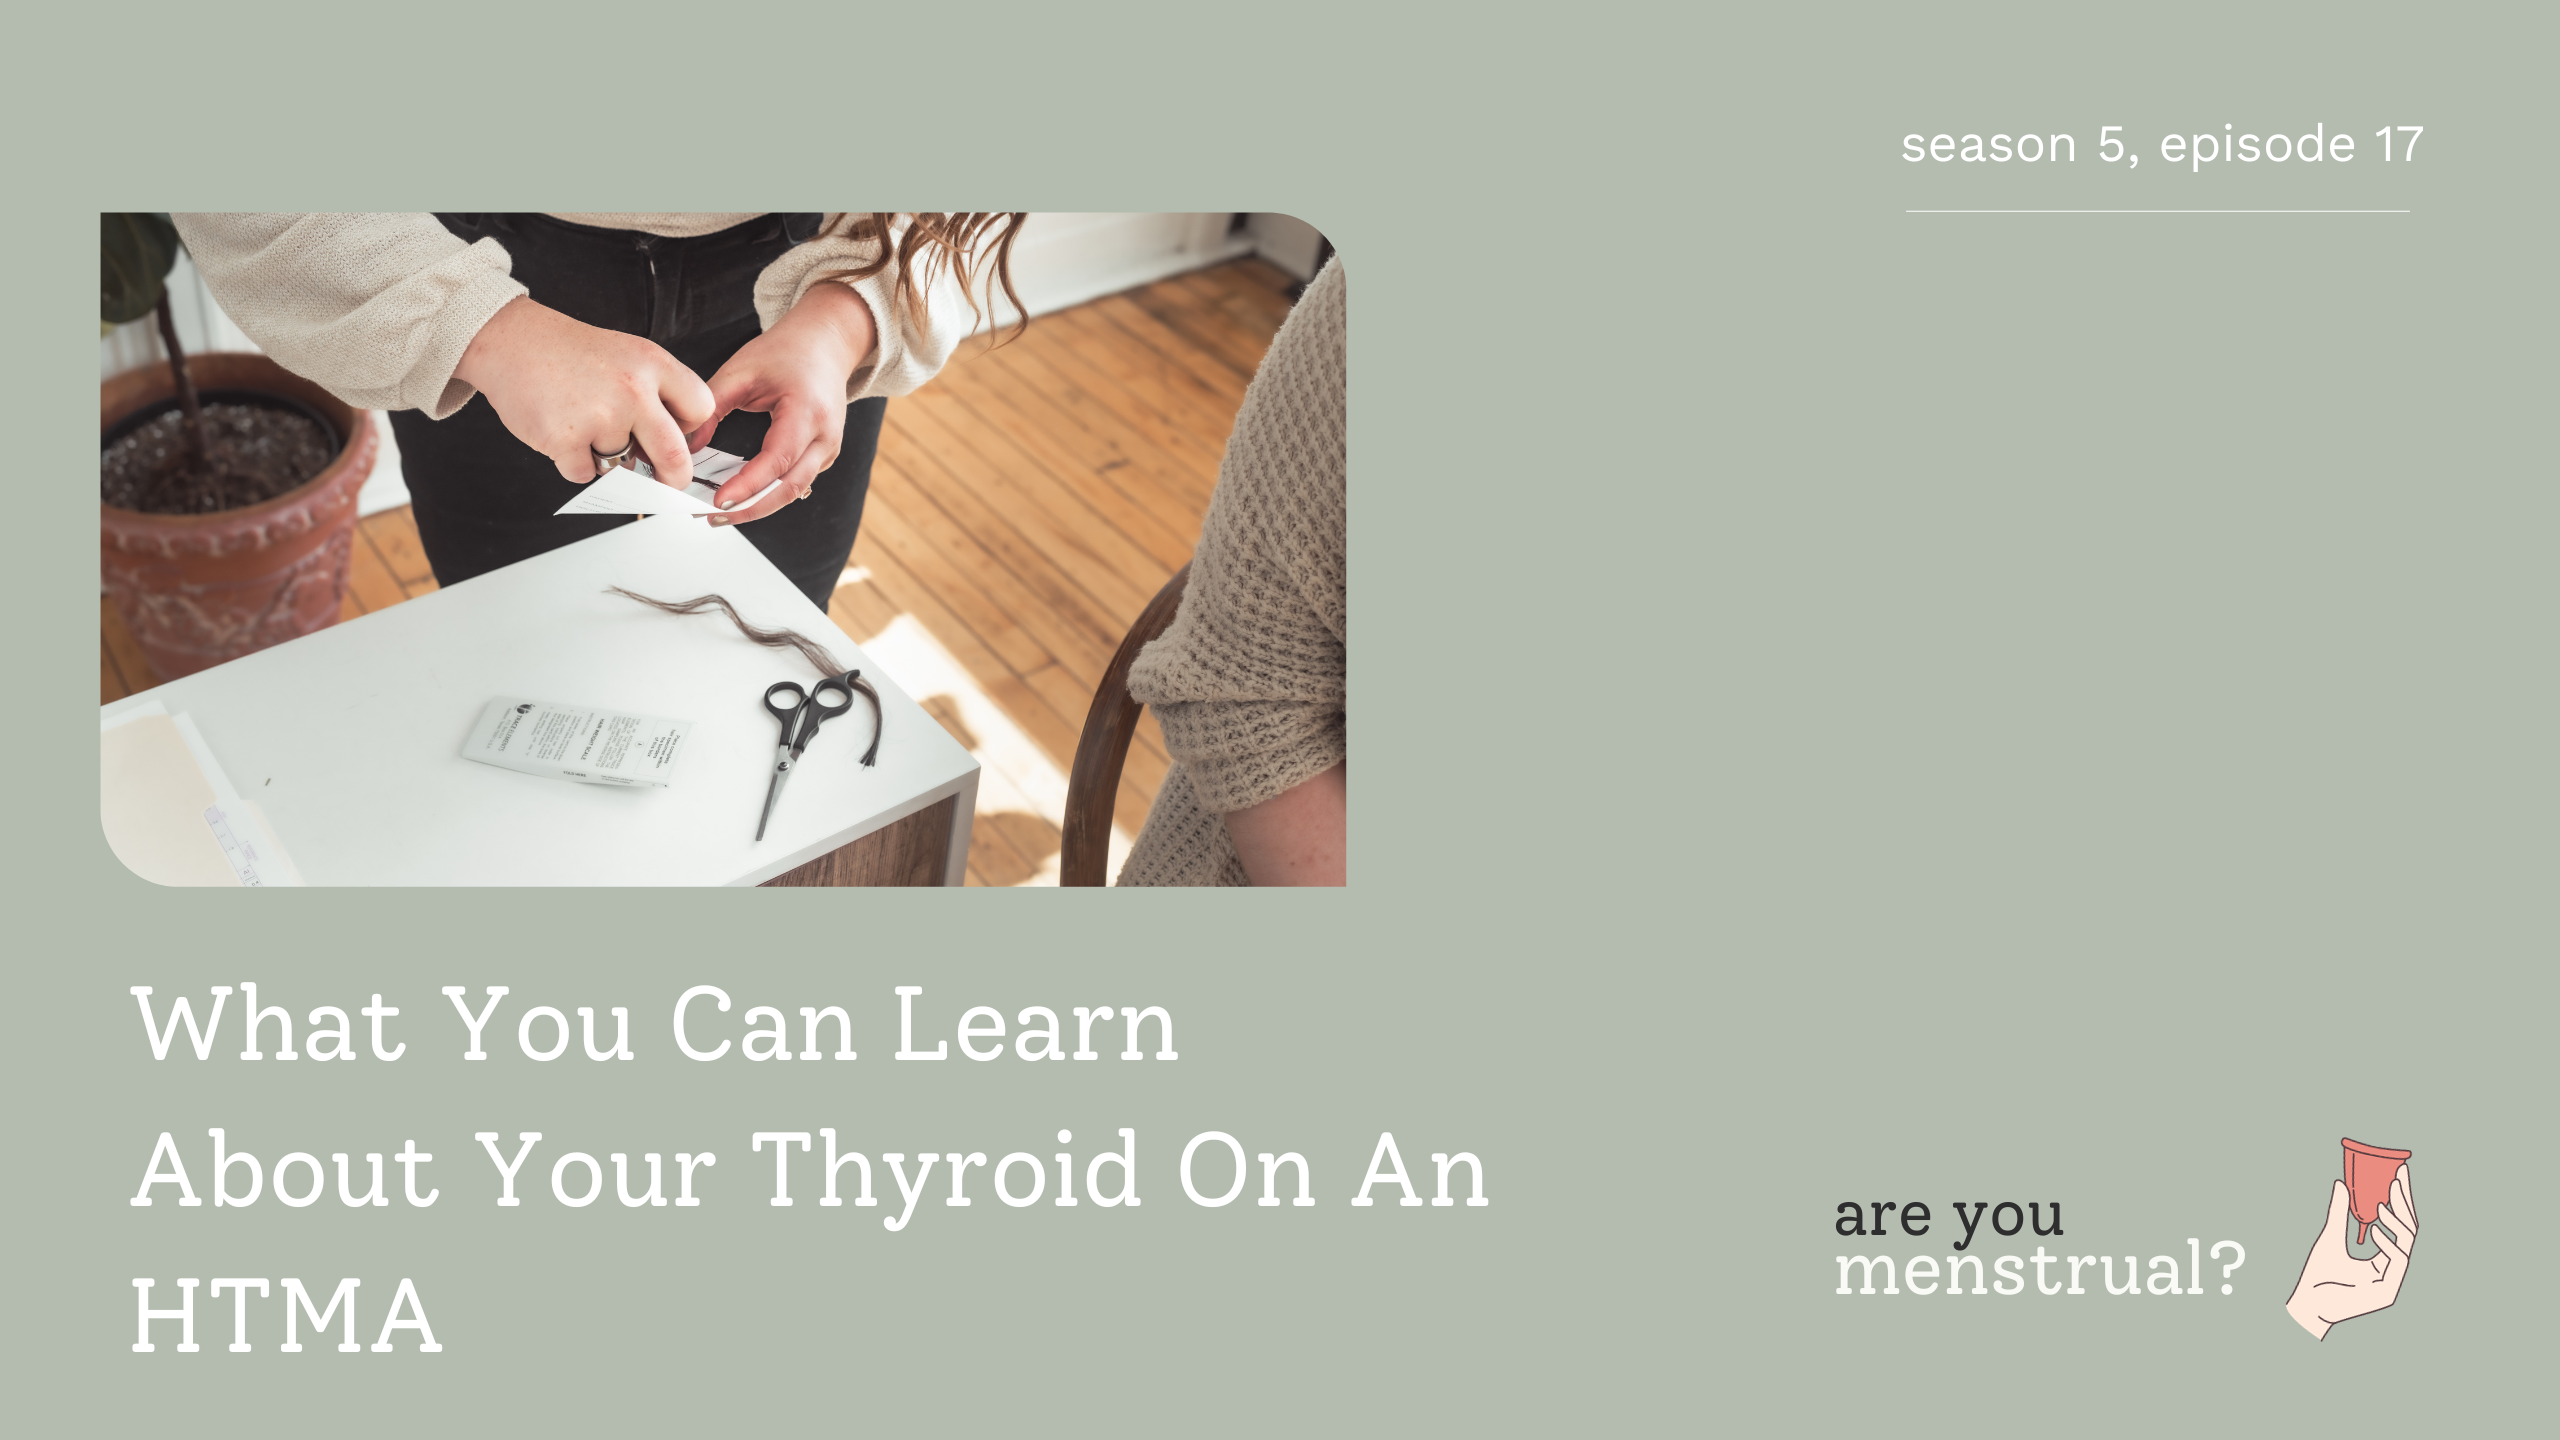 What You Can Learn About Your Thyroid On An HTMA